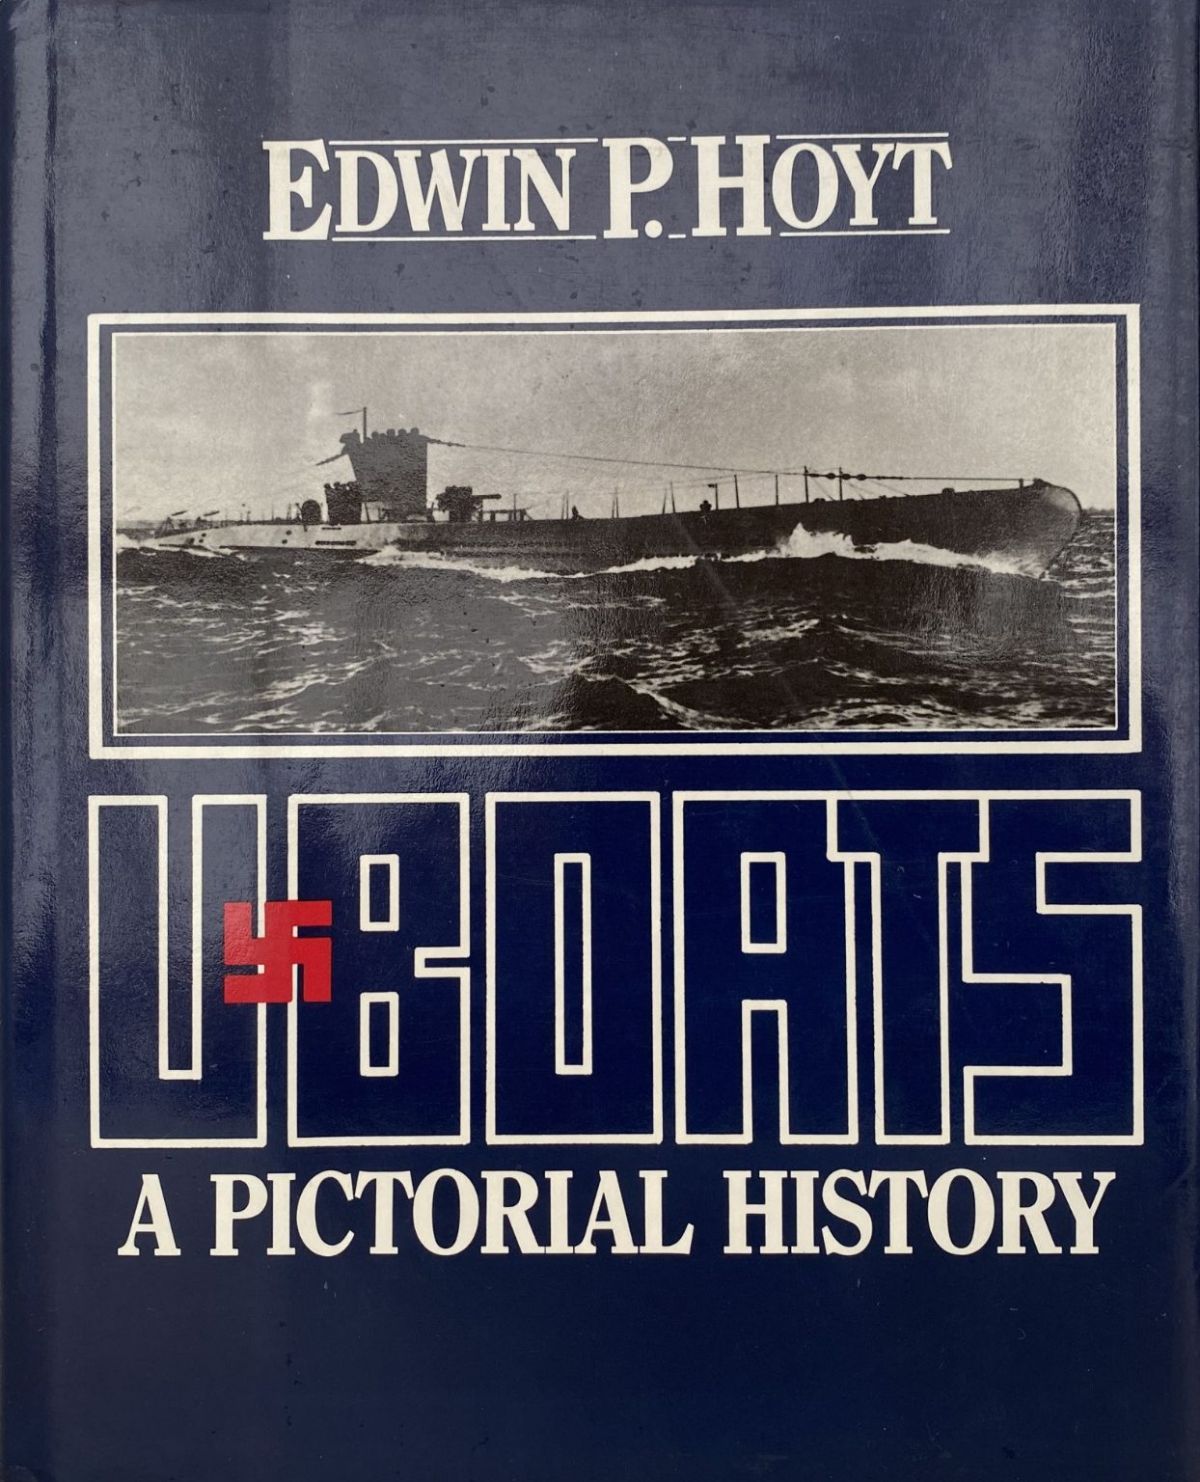 U-BOATS: A Pictorial History